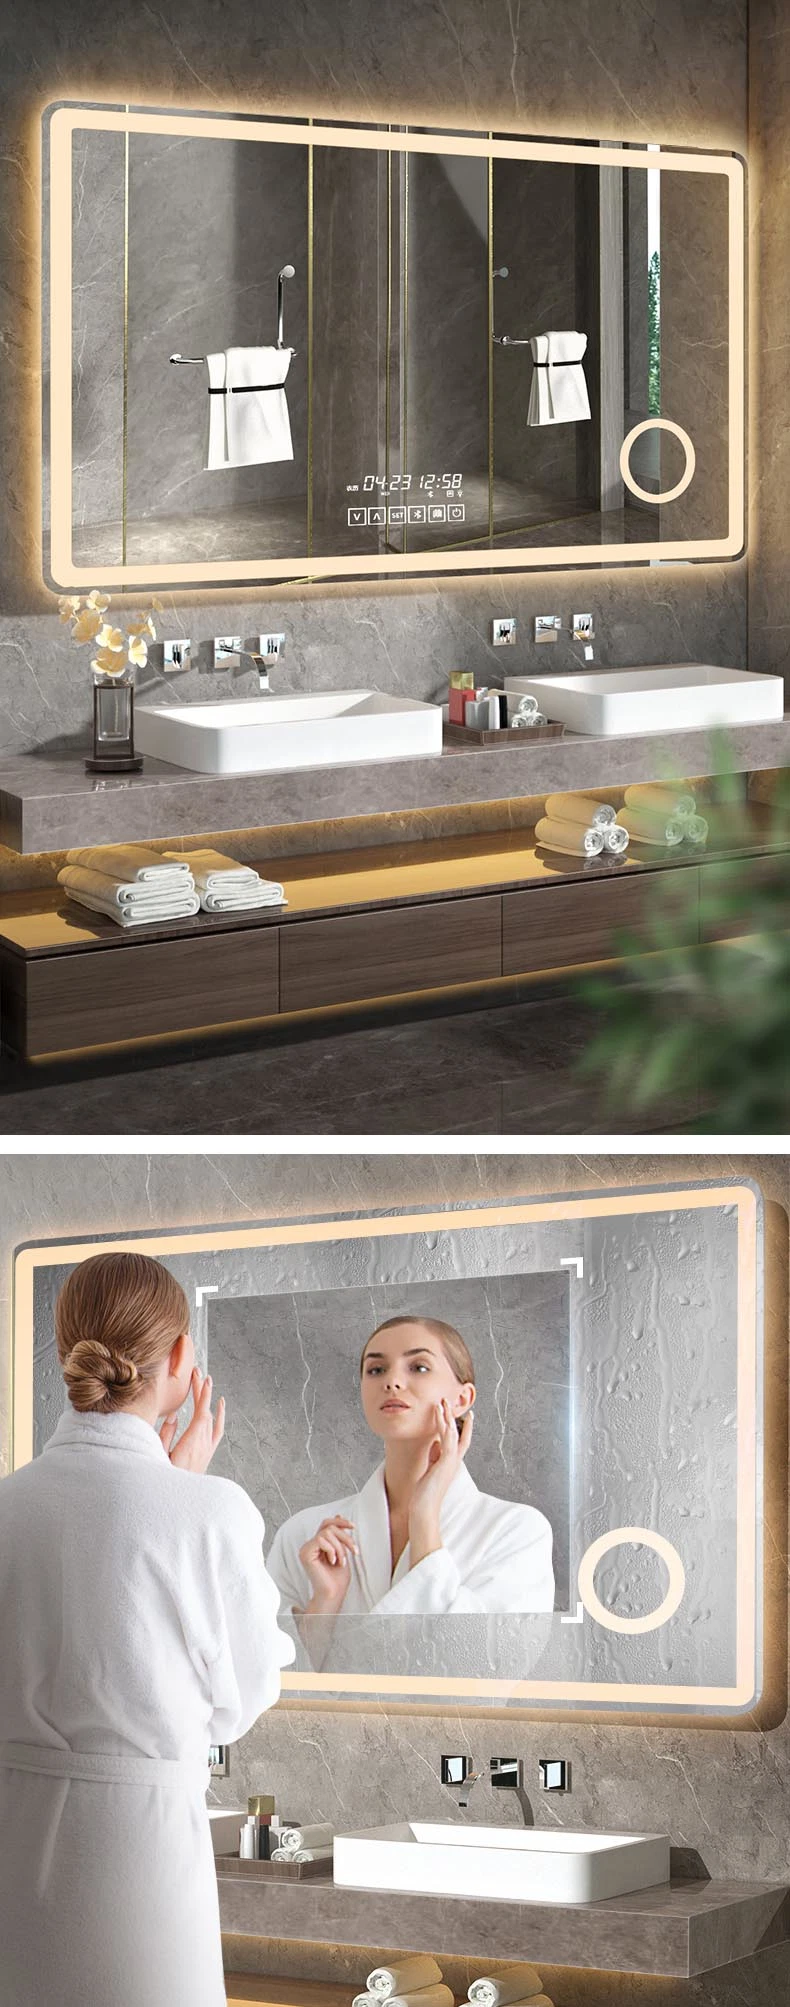 Mart LED Bathroom Mirror Touch Frame Circle Mounted Bathrooms Wall Mirrors